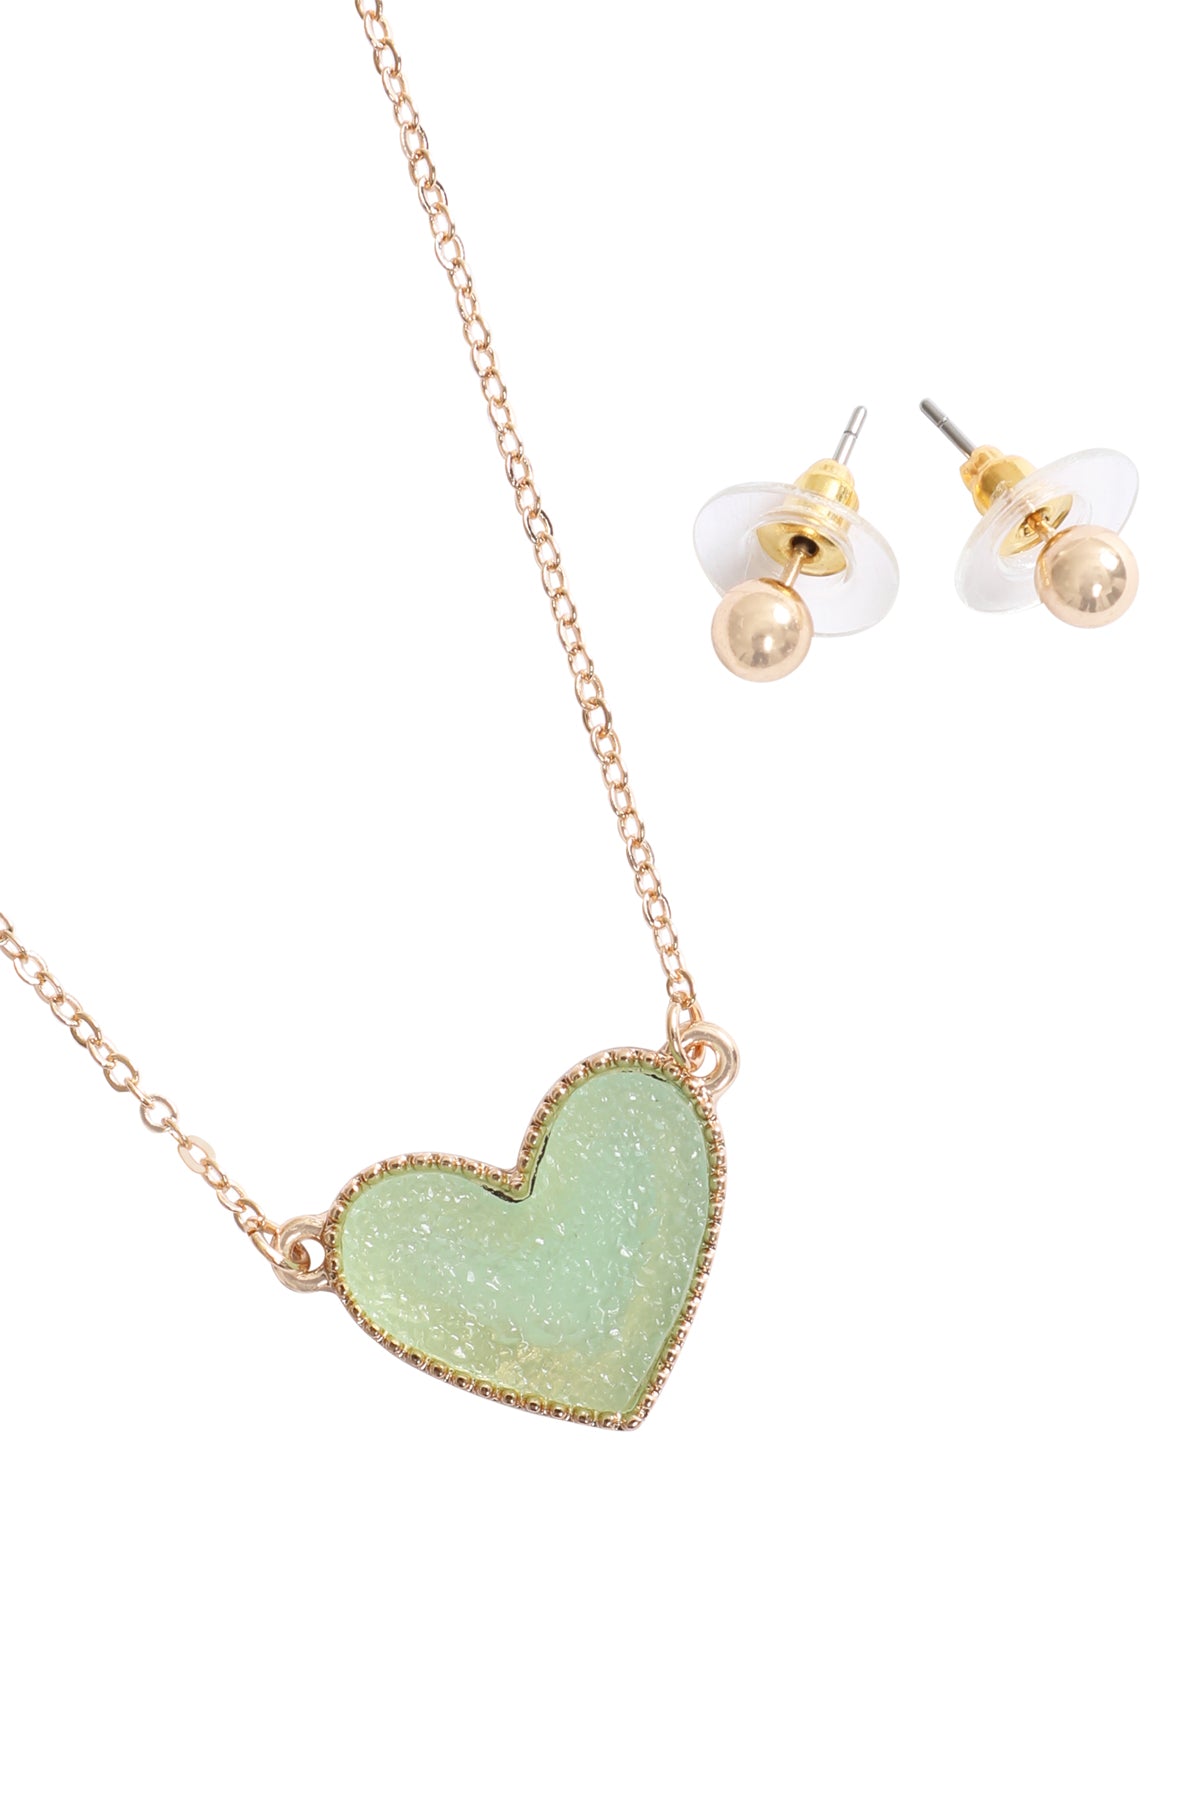 VALENTINE DRUZY PENDANT NECKLACE AND EARRING SET